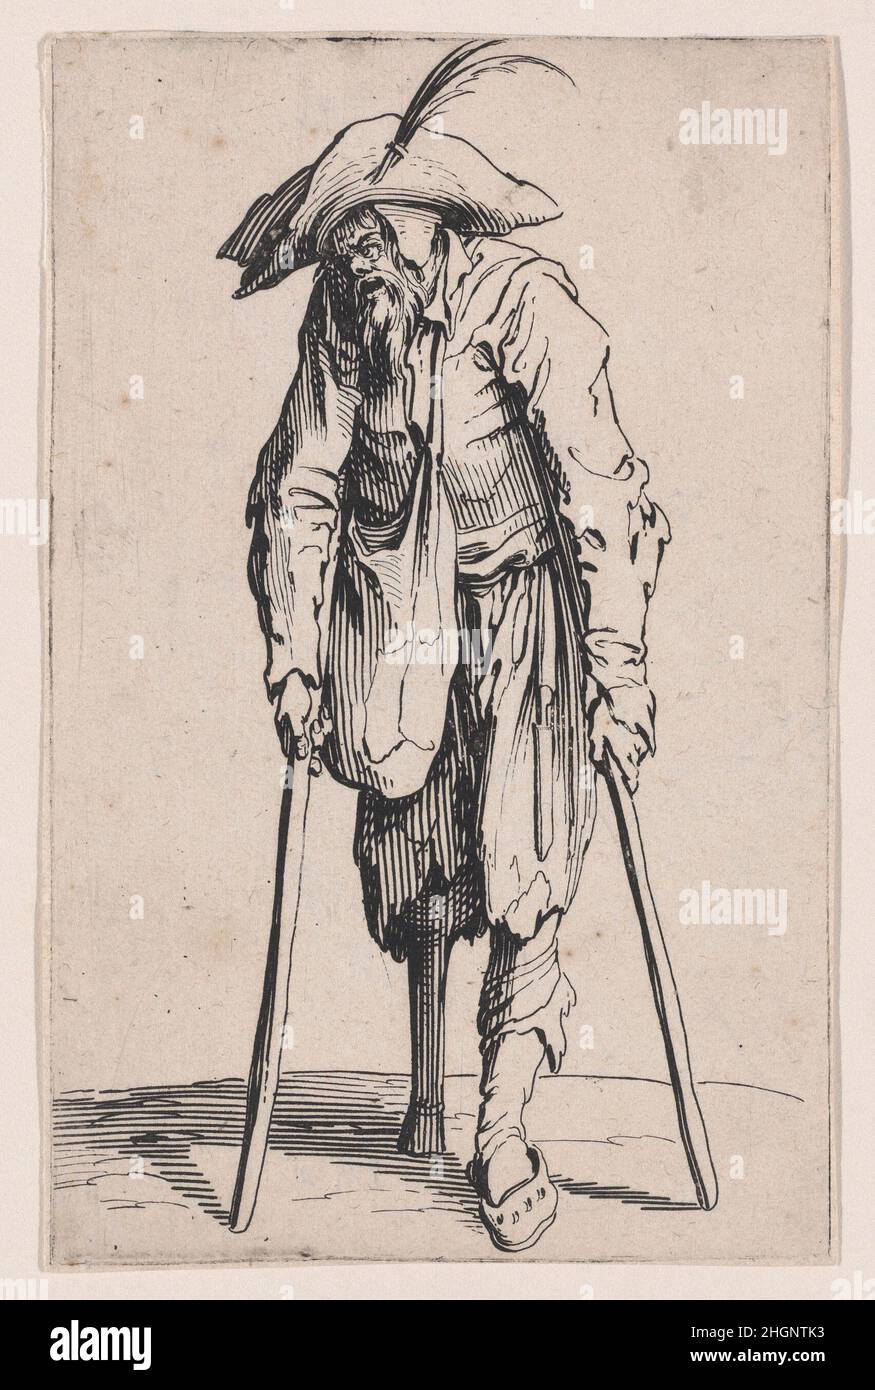 Le Mendiant a la Jambe de Bois (The Beggar with the Wooden Leg), from Les Gueux suite appelée aussi Les Mendiants, Les Baroni, ou Les Barons (The Beggars, also called the Barons) ca. 1623 Jacques Callot French. Le Mendiant a la Jambe de Bois (The Beggar with the Wooden Leg), from Les Gueux suite appelée aussi Les Mendiants, Les Baroni, ou Les Barons (The Beggars, also called the Barons). Les Gueux suite appelée aussi Les Mendiants, Les Baroni, ou Les Barons. Jacques Callot (French, Nancy 1592–1635 Nancy). ca. 1623. Etching; first state of two (Lieure). Prints Stock Photo